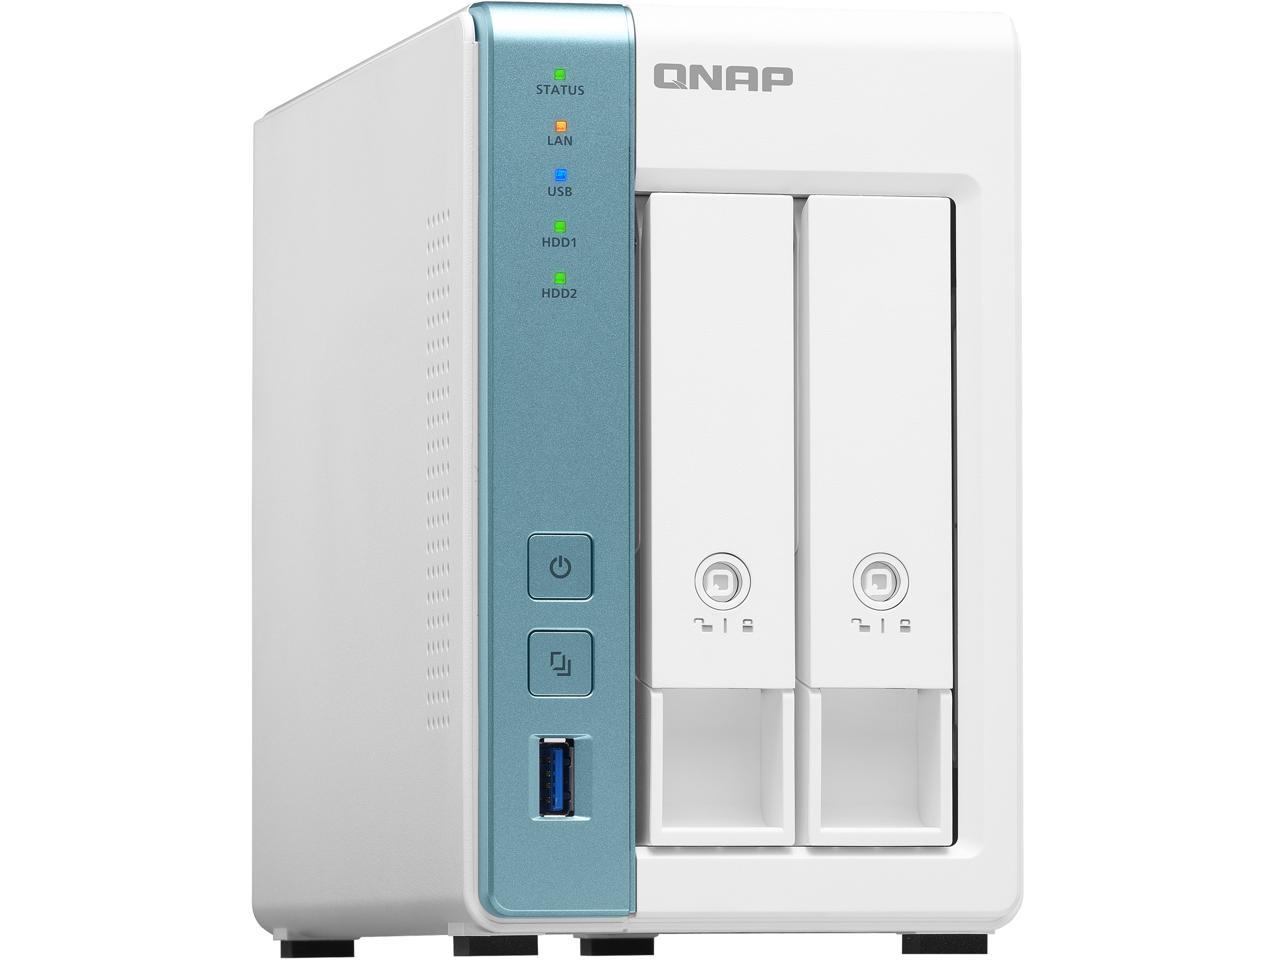 how do i watch qnap surveillance station in windows 10